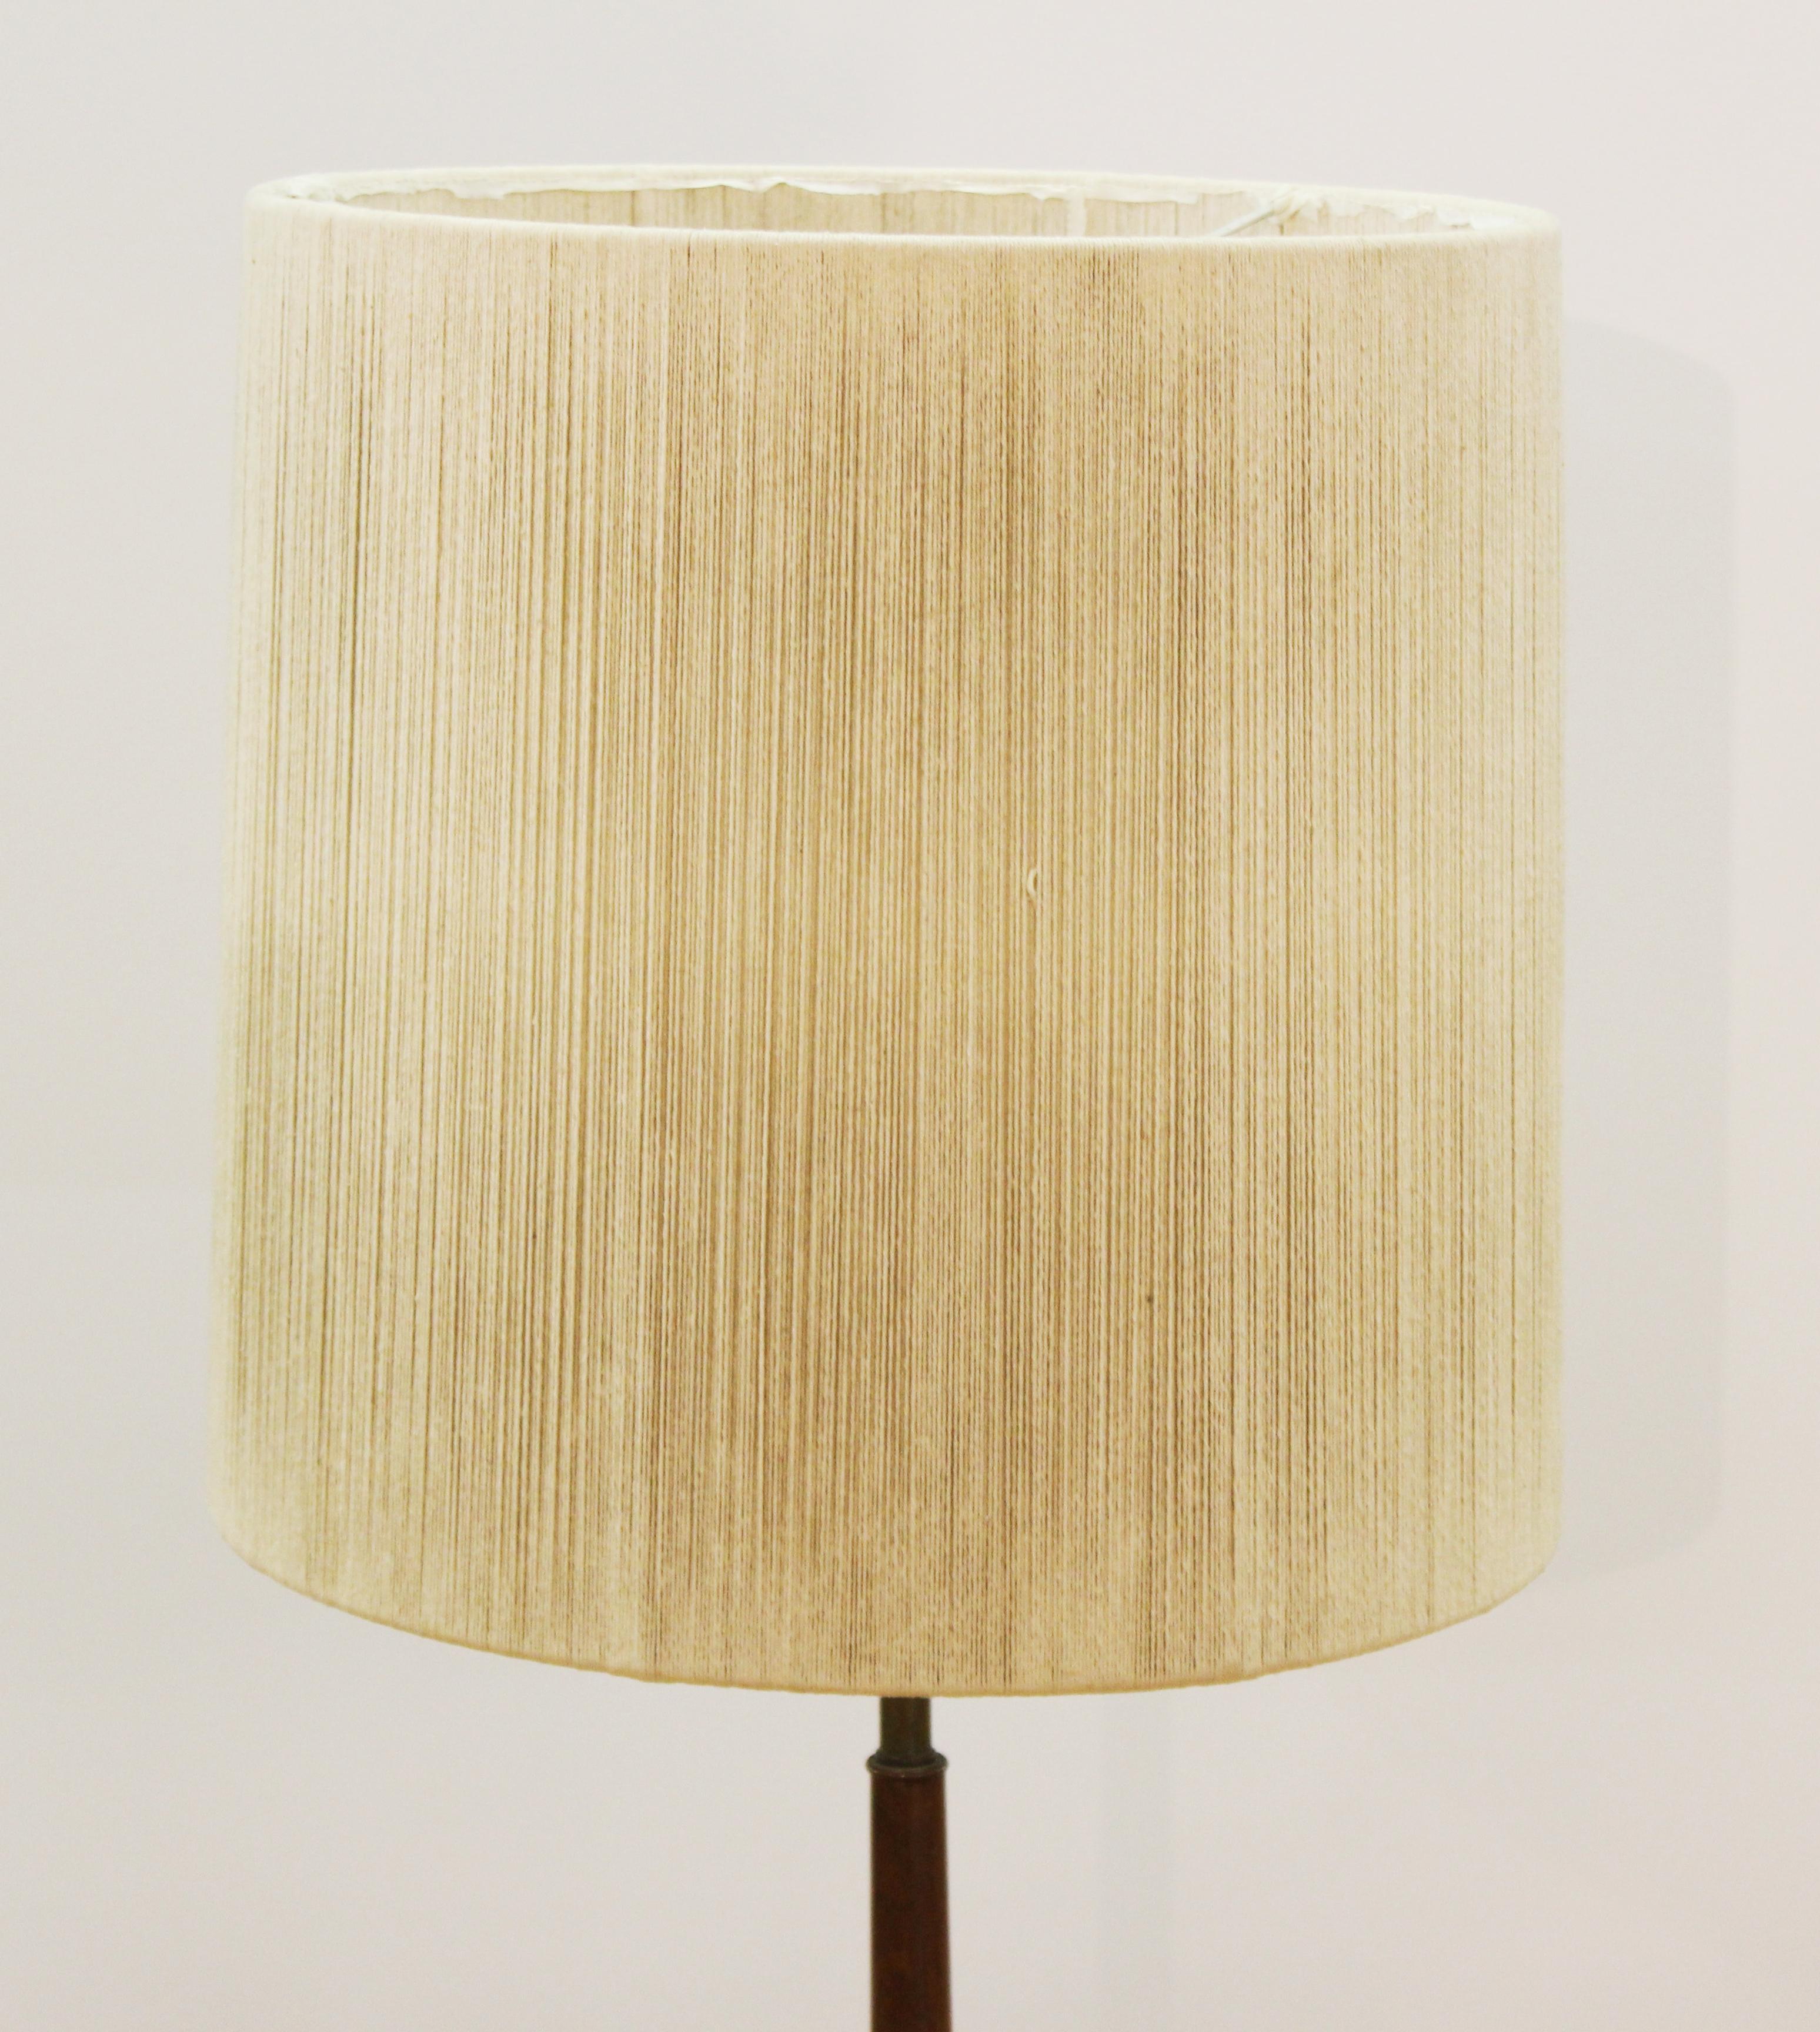 Mid-Century Modern floor lamp with wooden shaft and tripod metal legs. With original shade.